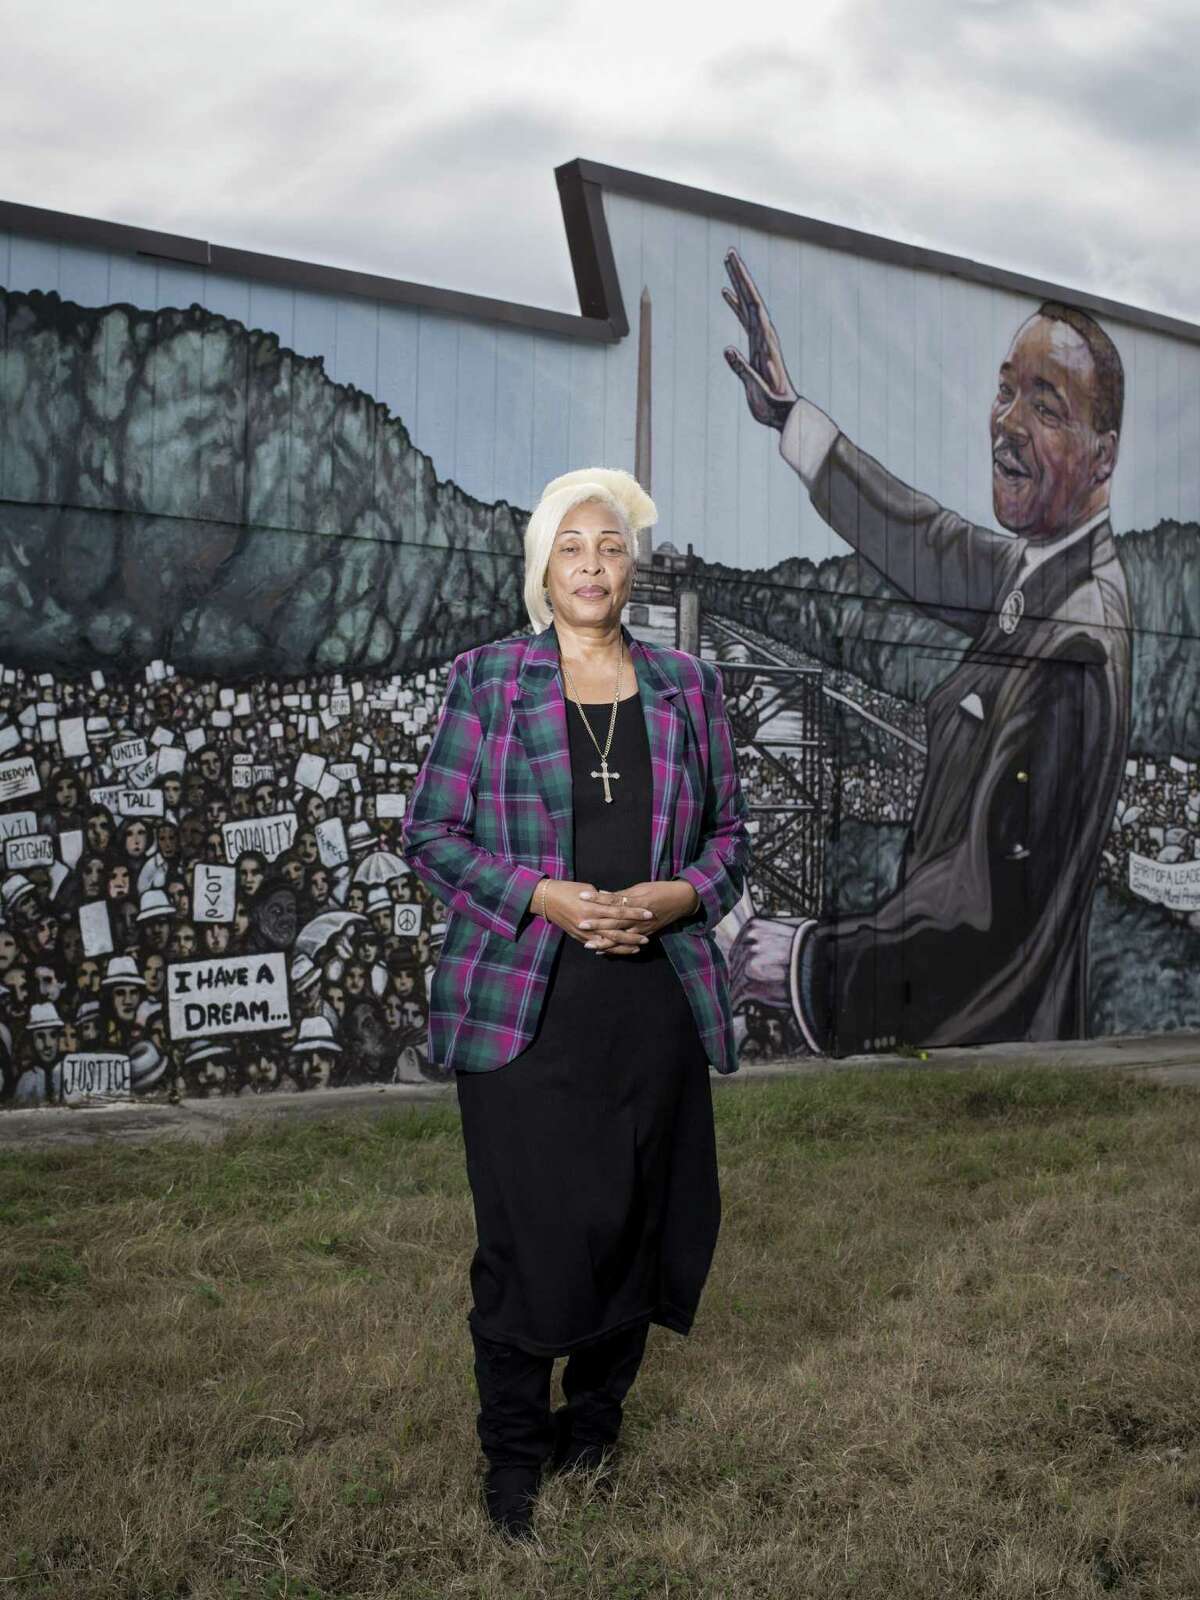 Rosa L. Wilson, pastor of the Greater Faith Institutional Church poses for a portrait in front of the church's mural of Martin Luther King Jr. on Saturday, January 14, 2017 in San Antonio, Texas.